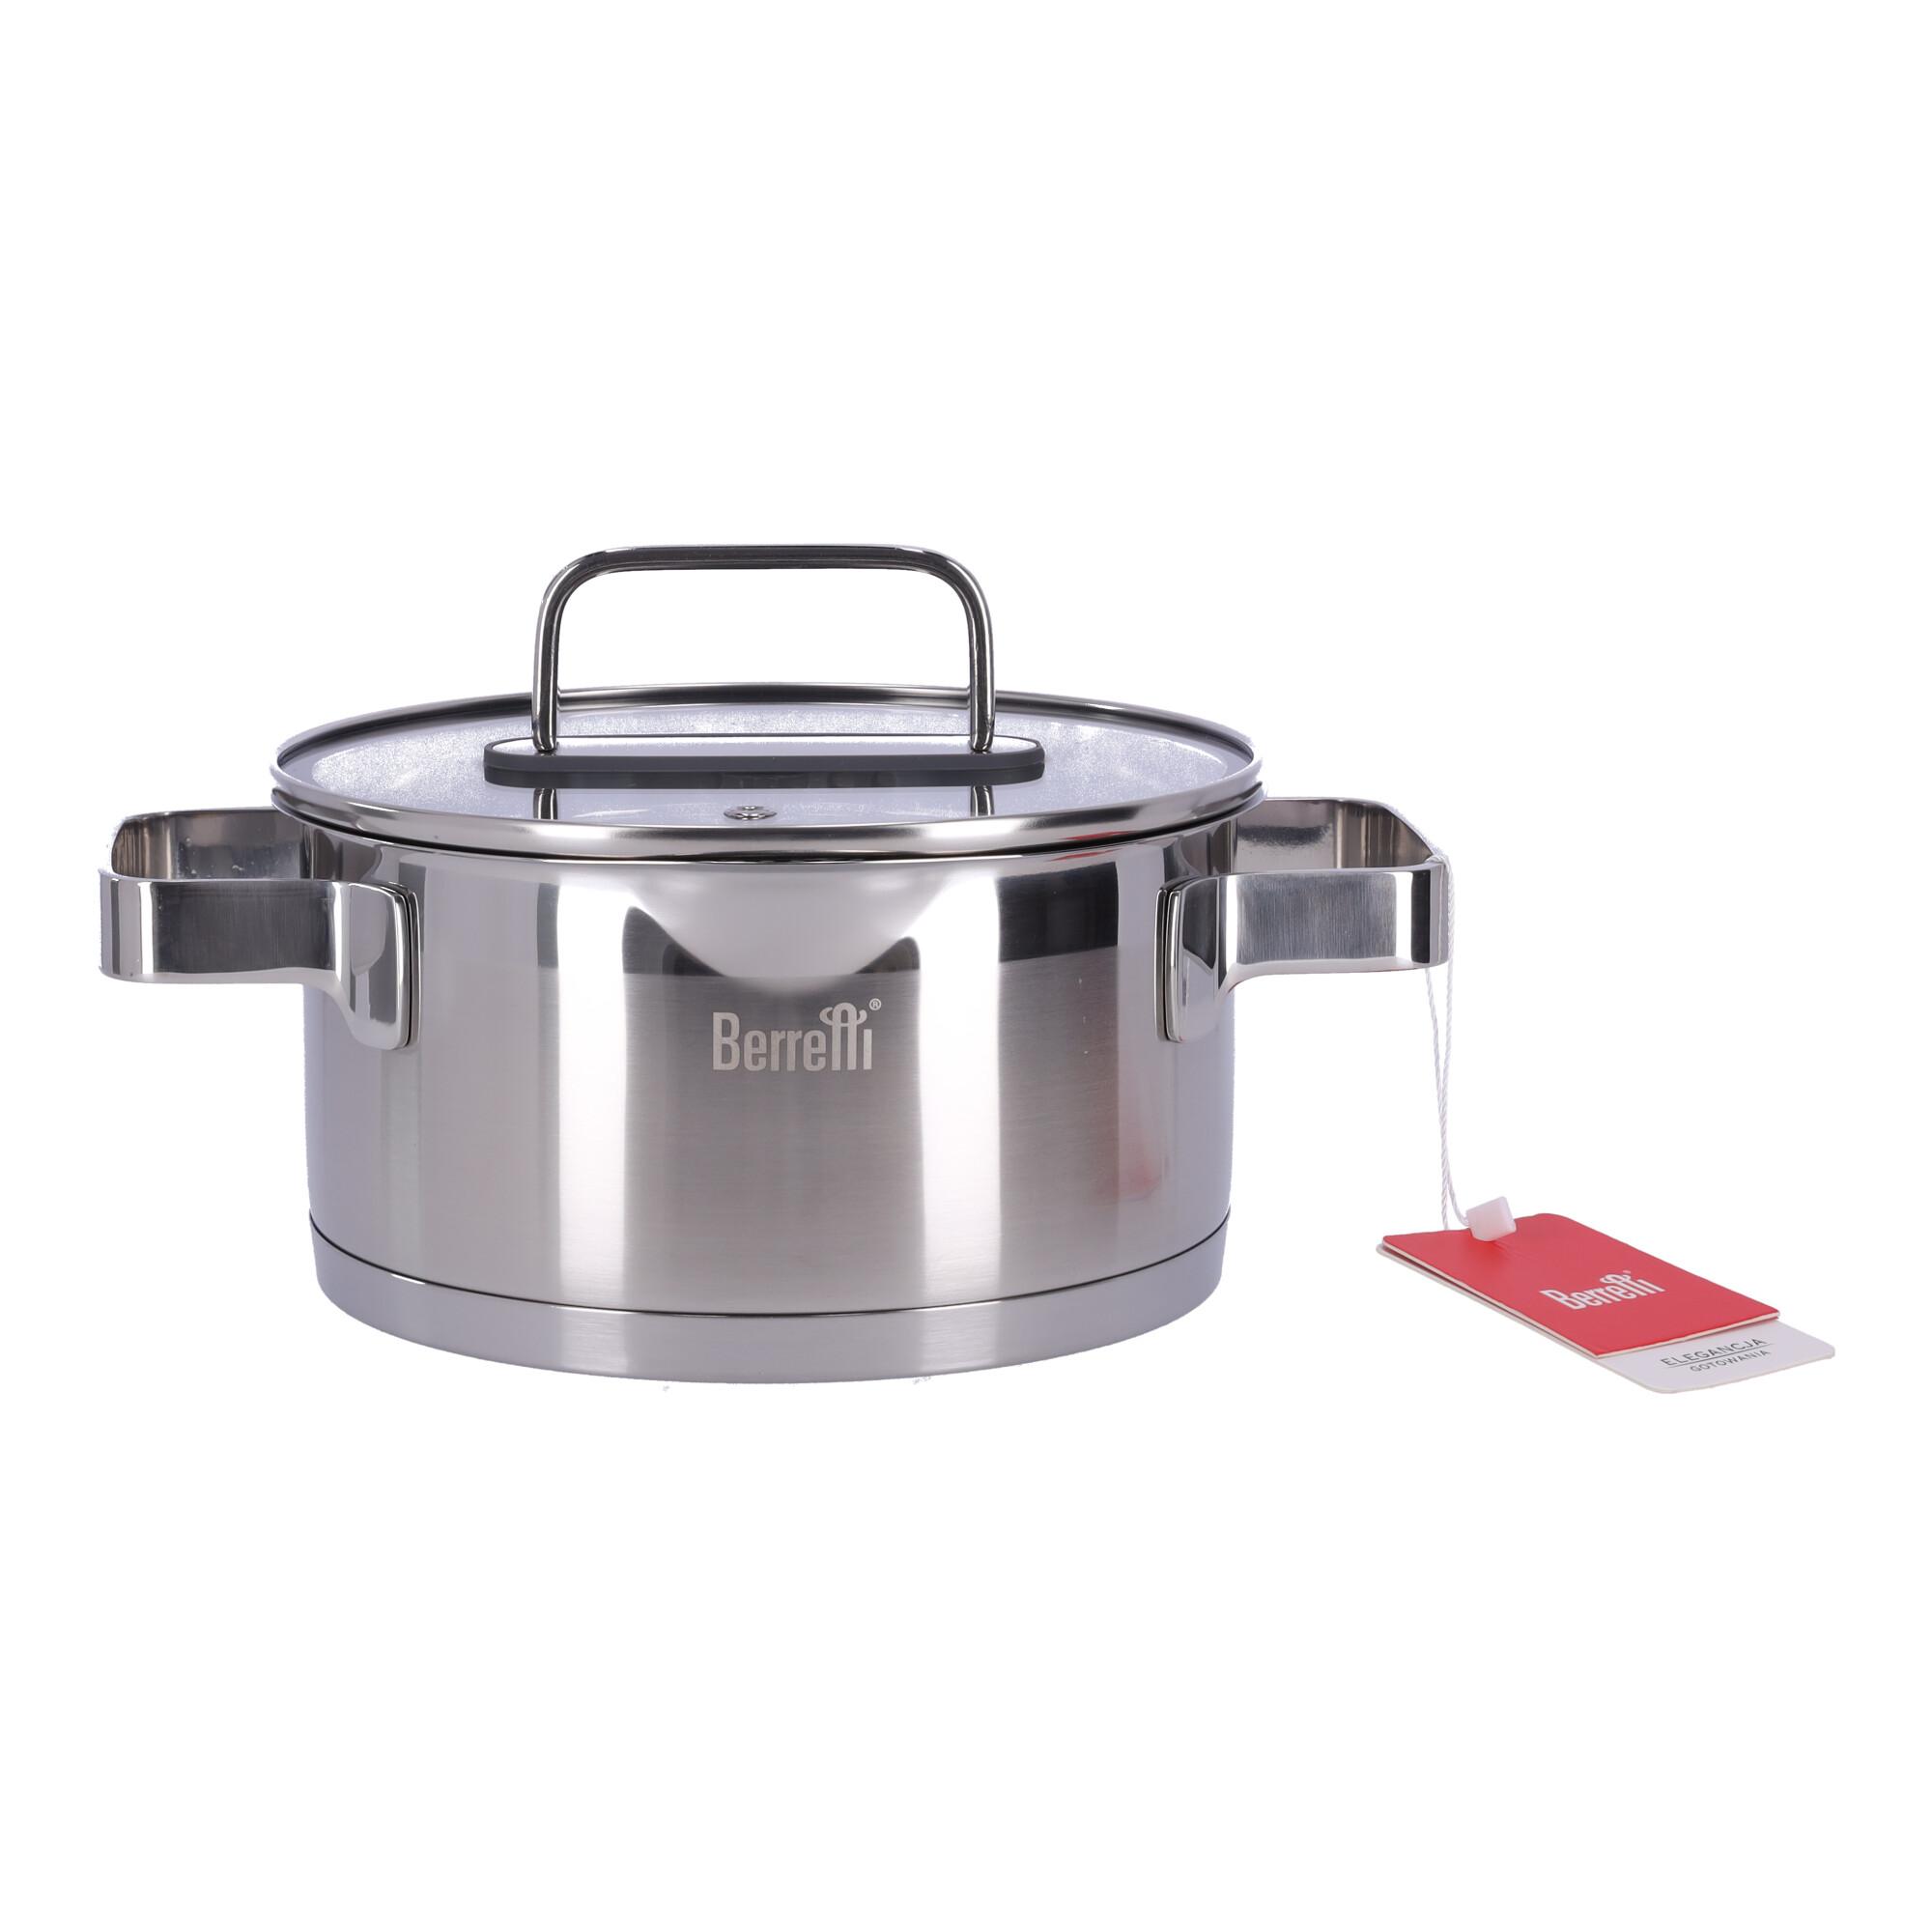 Stainless steel pot with lid Mistral BERRETTI, 18 cm